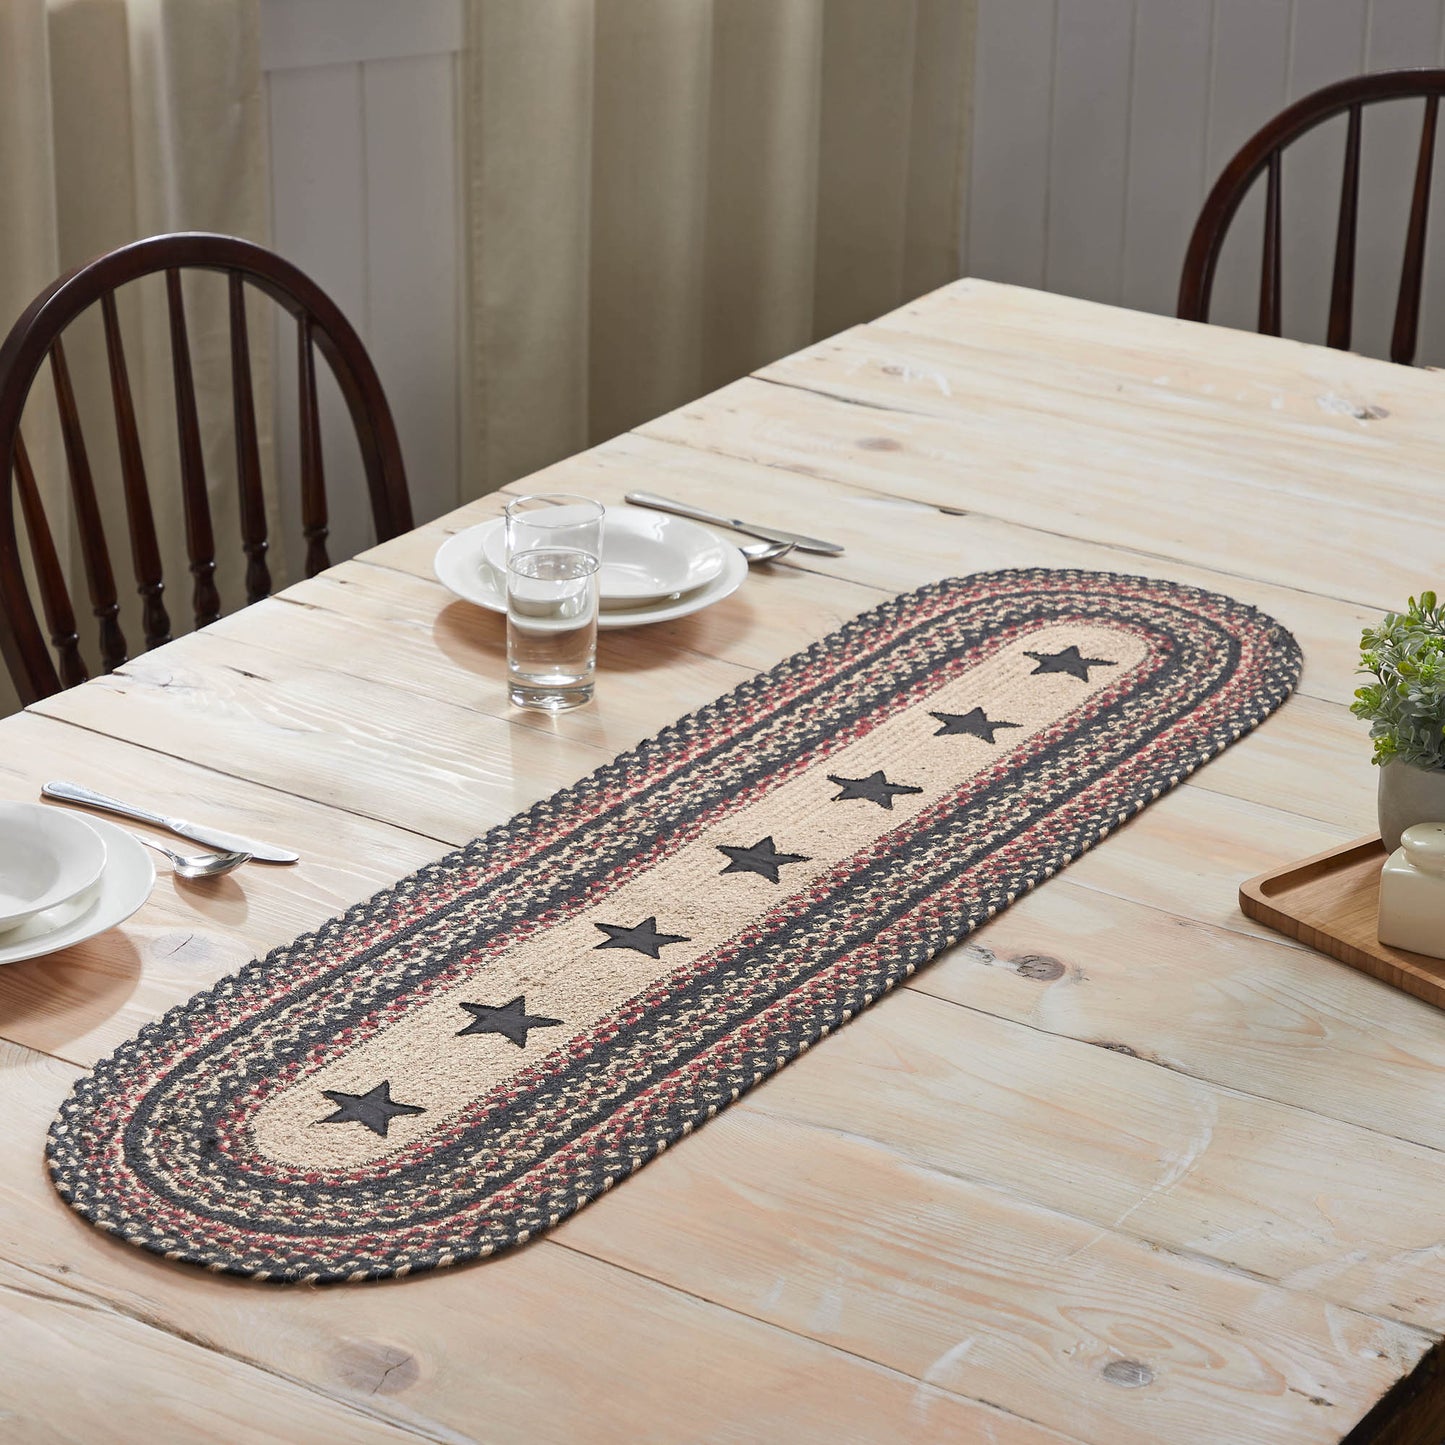 81330-Colonial-Star-Jute-Oval-Runner-13x48-image-5